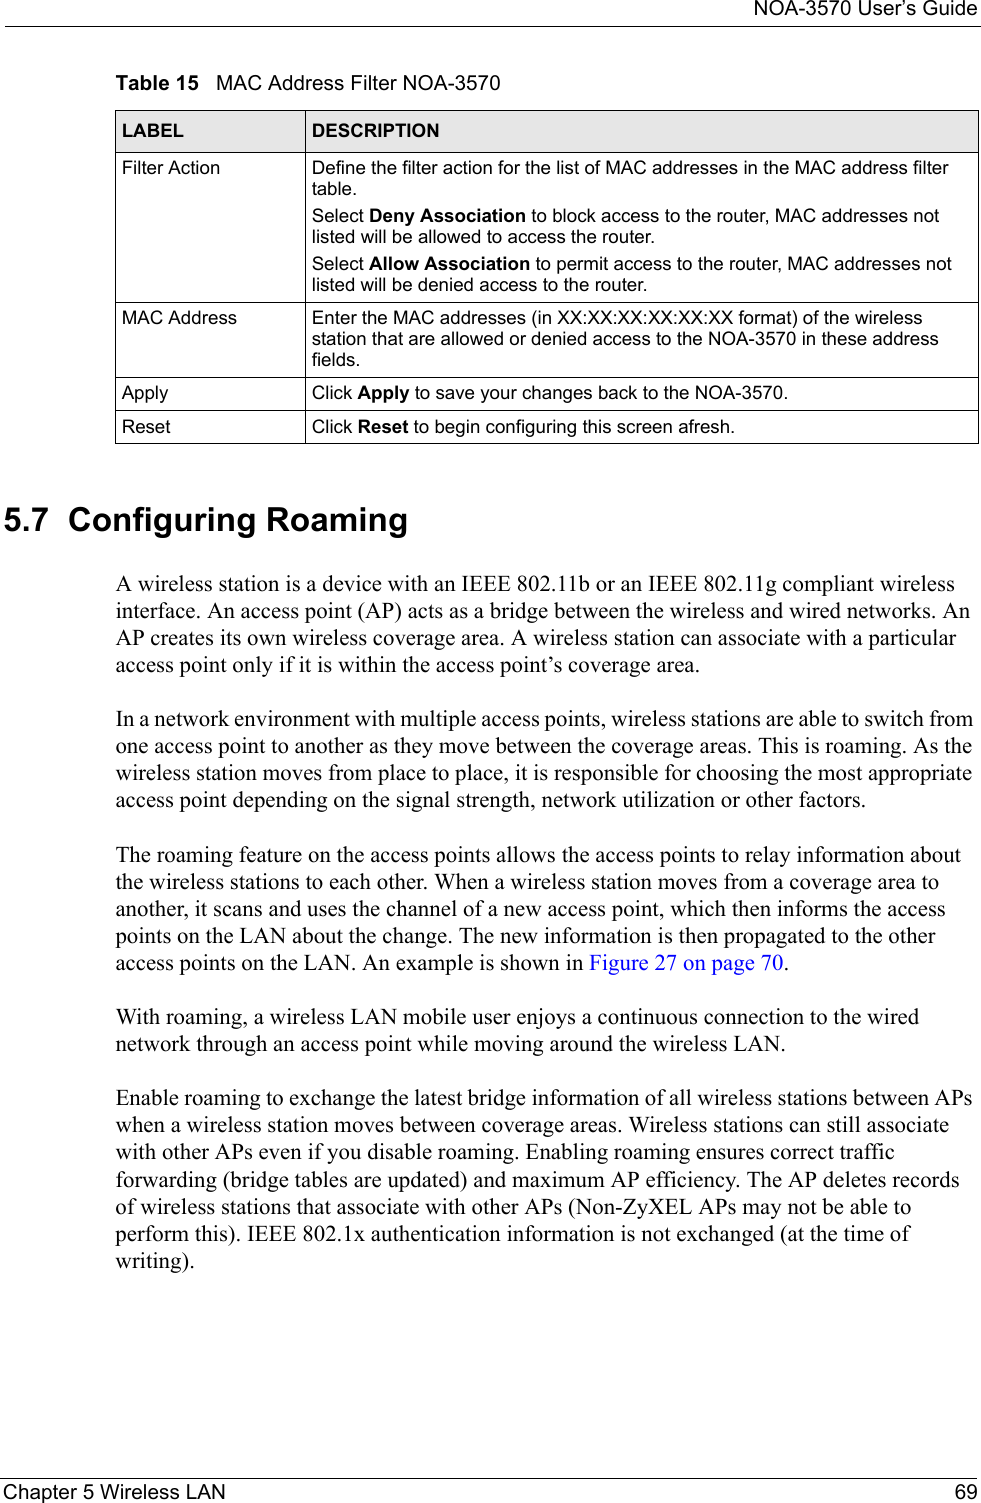 NOA-3570 User’s GuideChapter 5 Wireless LAN 695.7  Configuring RoamingA wireless station is a device with an IEEE 802.11b or an IEEE 802.11g compliant wireless interface. An access point (AP) acts as a bridge between the wireless and wired networks. An AP creates its own wireless coverage area. A wireless station can associate with a particular access point only if it is within the access point’s coverage area.In a network environment with multiple access points, wireless stations are able to switch from one access point to another as they move between the coverage areas. This is roaming. As the wireless station moves from place to place, it is responsible for choosing the most appropriate access point depending on the signal strength, network utilization or other factors.The roaming feature on the access points allows the access points to relay information about the wireless stations to each other. When a wireless station moves from a coverage area to another, it scans and uses the channel of a new access point, which then informs the access points on the LAN about the change. The new information is then propagated to the other access points on the LAN. An example is shown in Figure 27 on page 70.With roaming, a wireless LAN mobile user enjoys a continuous connection to the wired network through an access point while moving around the wireless LAN.Enable roaming to exchange the latest bridge information of all wireless stations between APs when a wireless station moves between coverage areas. Wireless stations can still associate with other APs even if you disable roaming. Enabling roaming ensures correct traffic forwarding (bridge tables are updated) and maximum AP efficiency. The AP deletes records of wireless stations that associate with other APs (Non-ZyXEL APs may not be able to perform this). IEEE 802.1x authentication information is not exchanged (at the time of writing).Filter Action  Define the filter action for the list of MAC addresses in the MAC address filter table. Select Deny Association to block access to the router, MAC addresses not listed will be allowed to access the router. Select Allow Association to permit access to the router, MAC addresses not listed will be denied access to the router.MAC Address Enter the MAC addresses (in XX:XX:XX:XX:XX:XX format) of the wireless station that are allowed or denied access to the NOA-3570 in these address fields.Apply Click Apply to save your changes back to the NOA-3570.Reset Click Reset to begin configuring this screen afresh.Table 15   MAC Address Filter NOA-3570LABEL DESCRIPTION